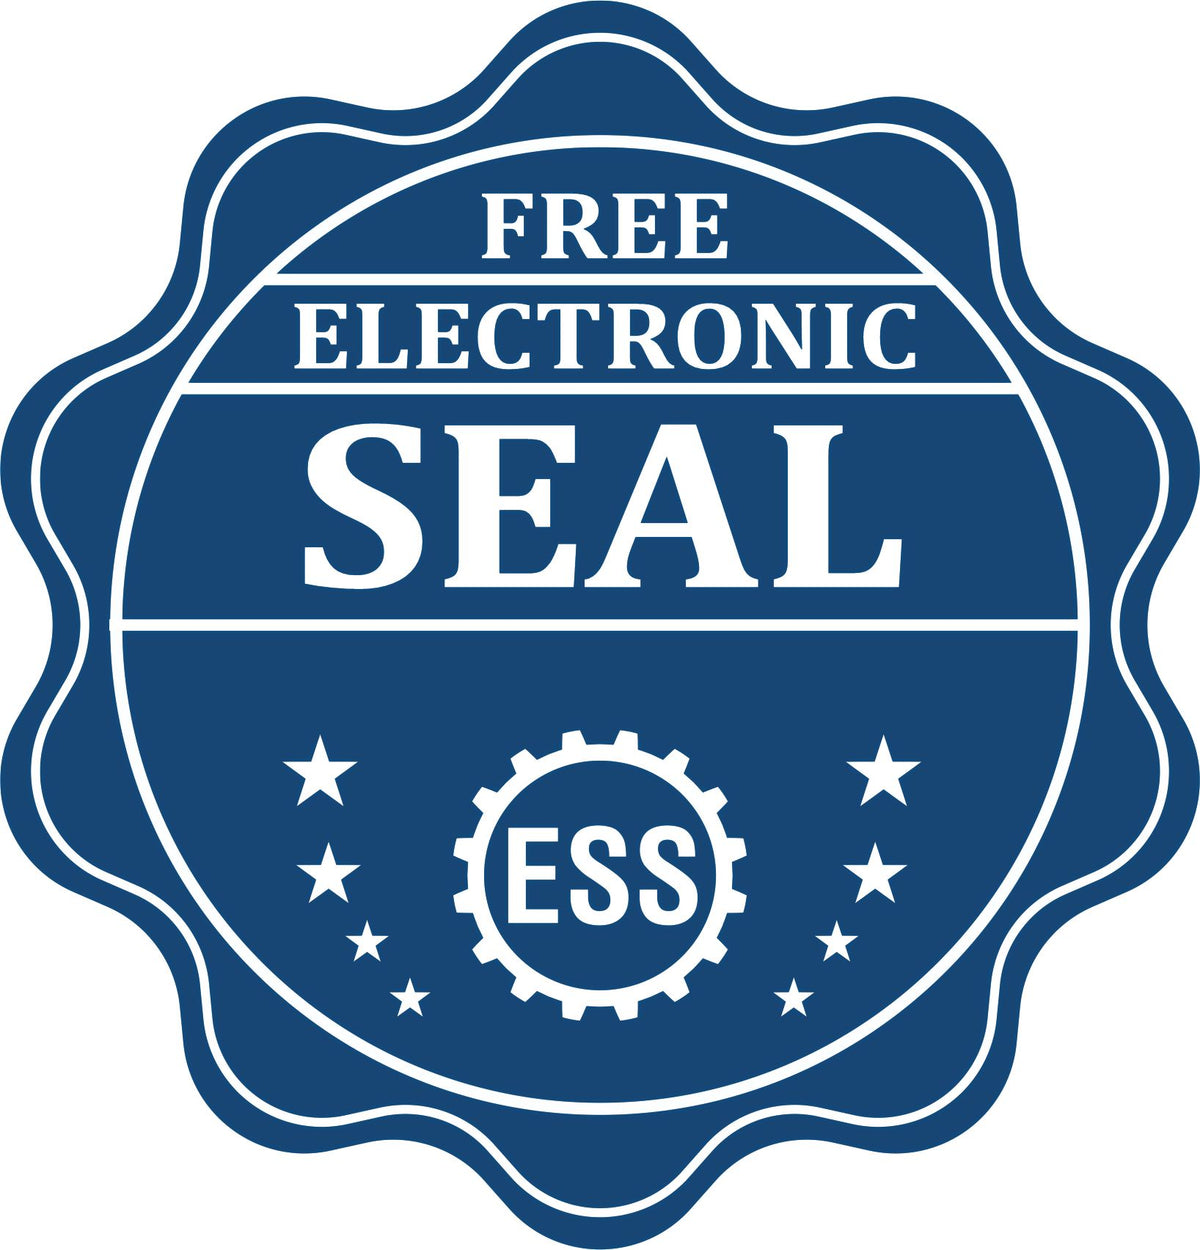 A badge showing a free electronic seal for the Slim Pre-Inked New Mexico Professional Geologist Seal Stamp with stars and the ESS gear on the emblem.